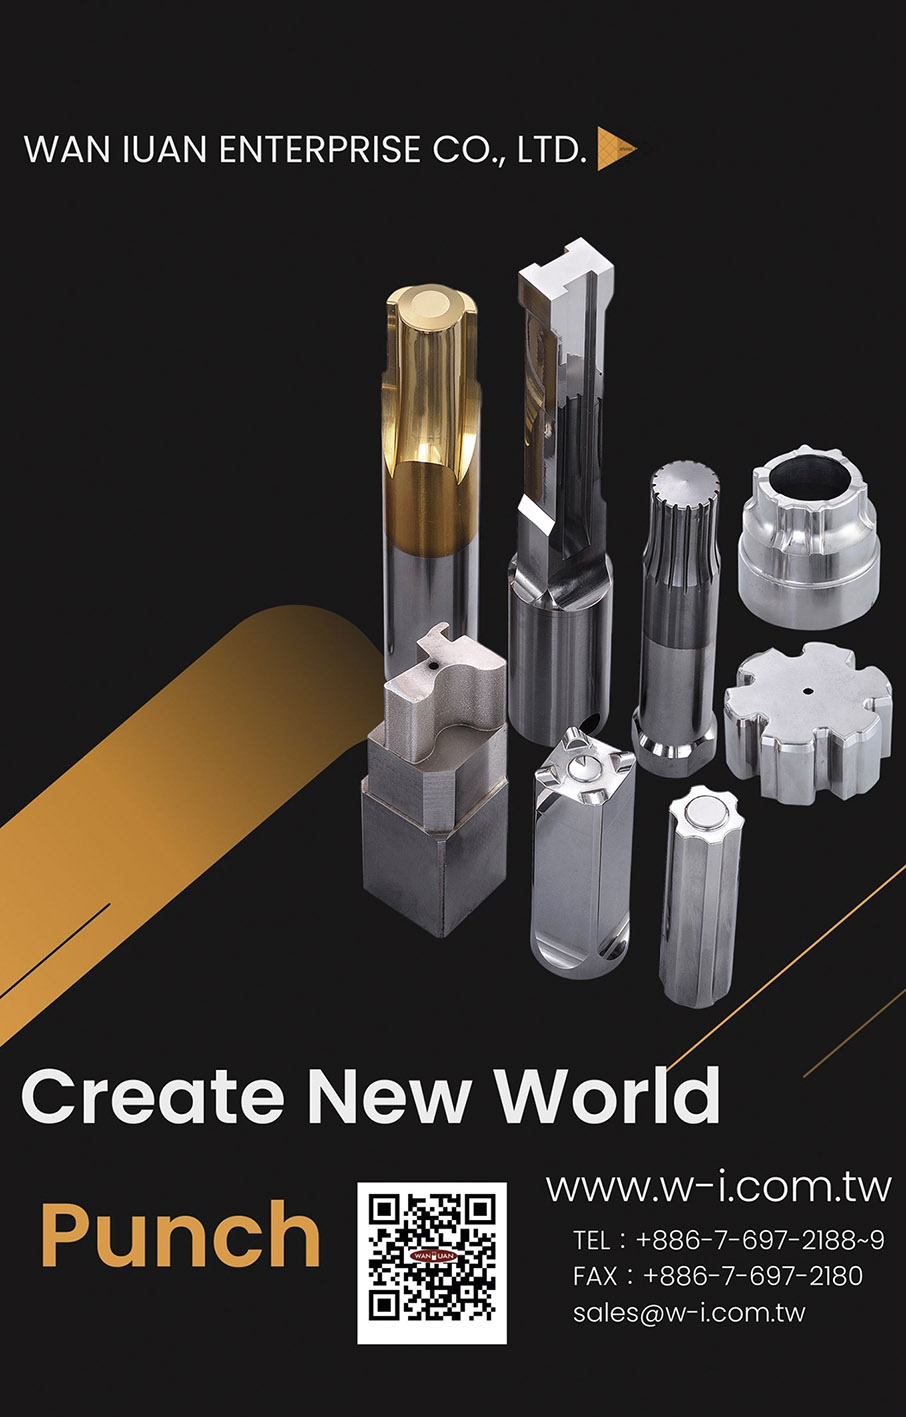 WAN IUAN ENTERPRISE CO., LTD.  , Second Punch, Polygon Punch, Customize Punch, Round Punches Pins, Screw Dies, Carbide Punch, Round Punch, Machine Parts